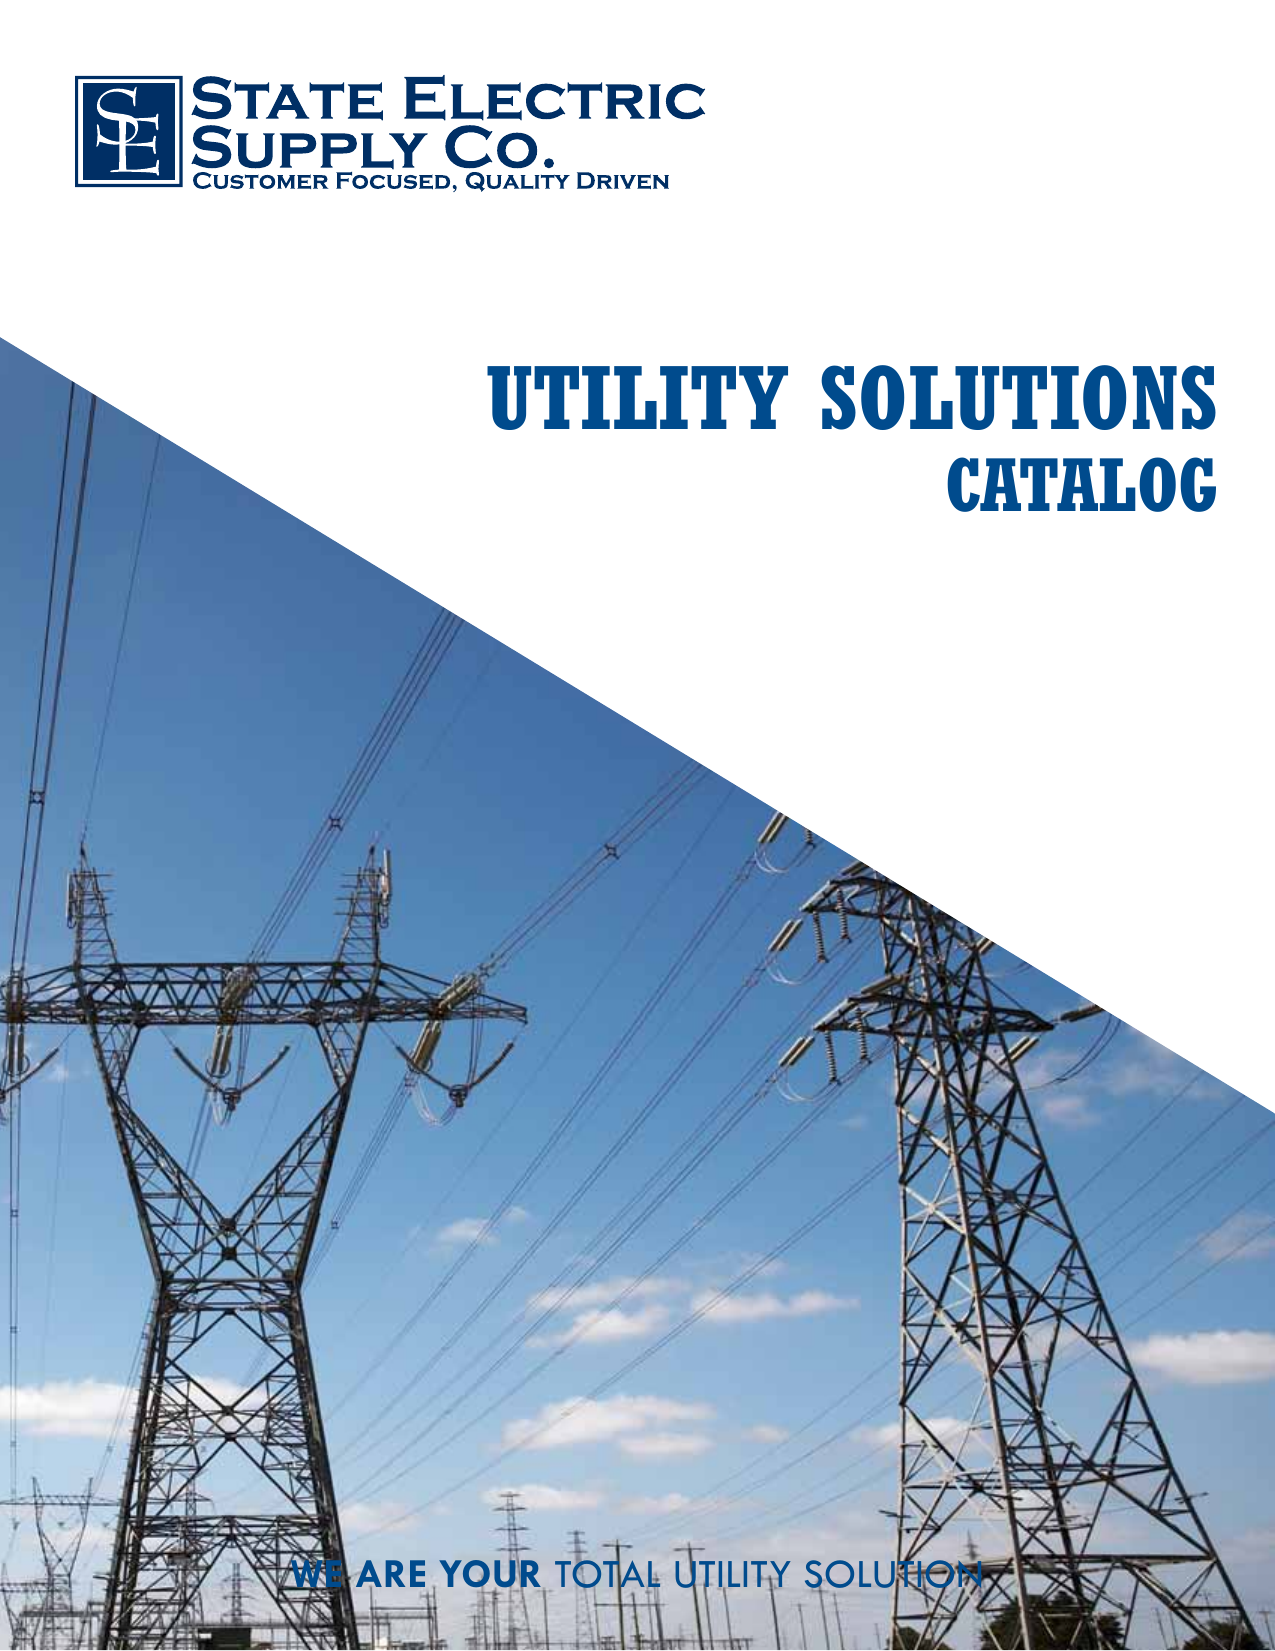 UTILITY soLUTIons State Electric Supply Company